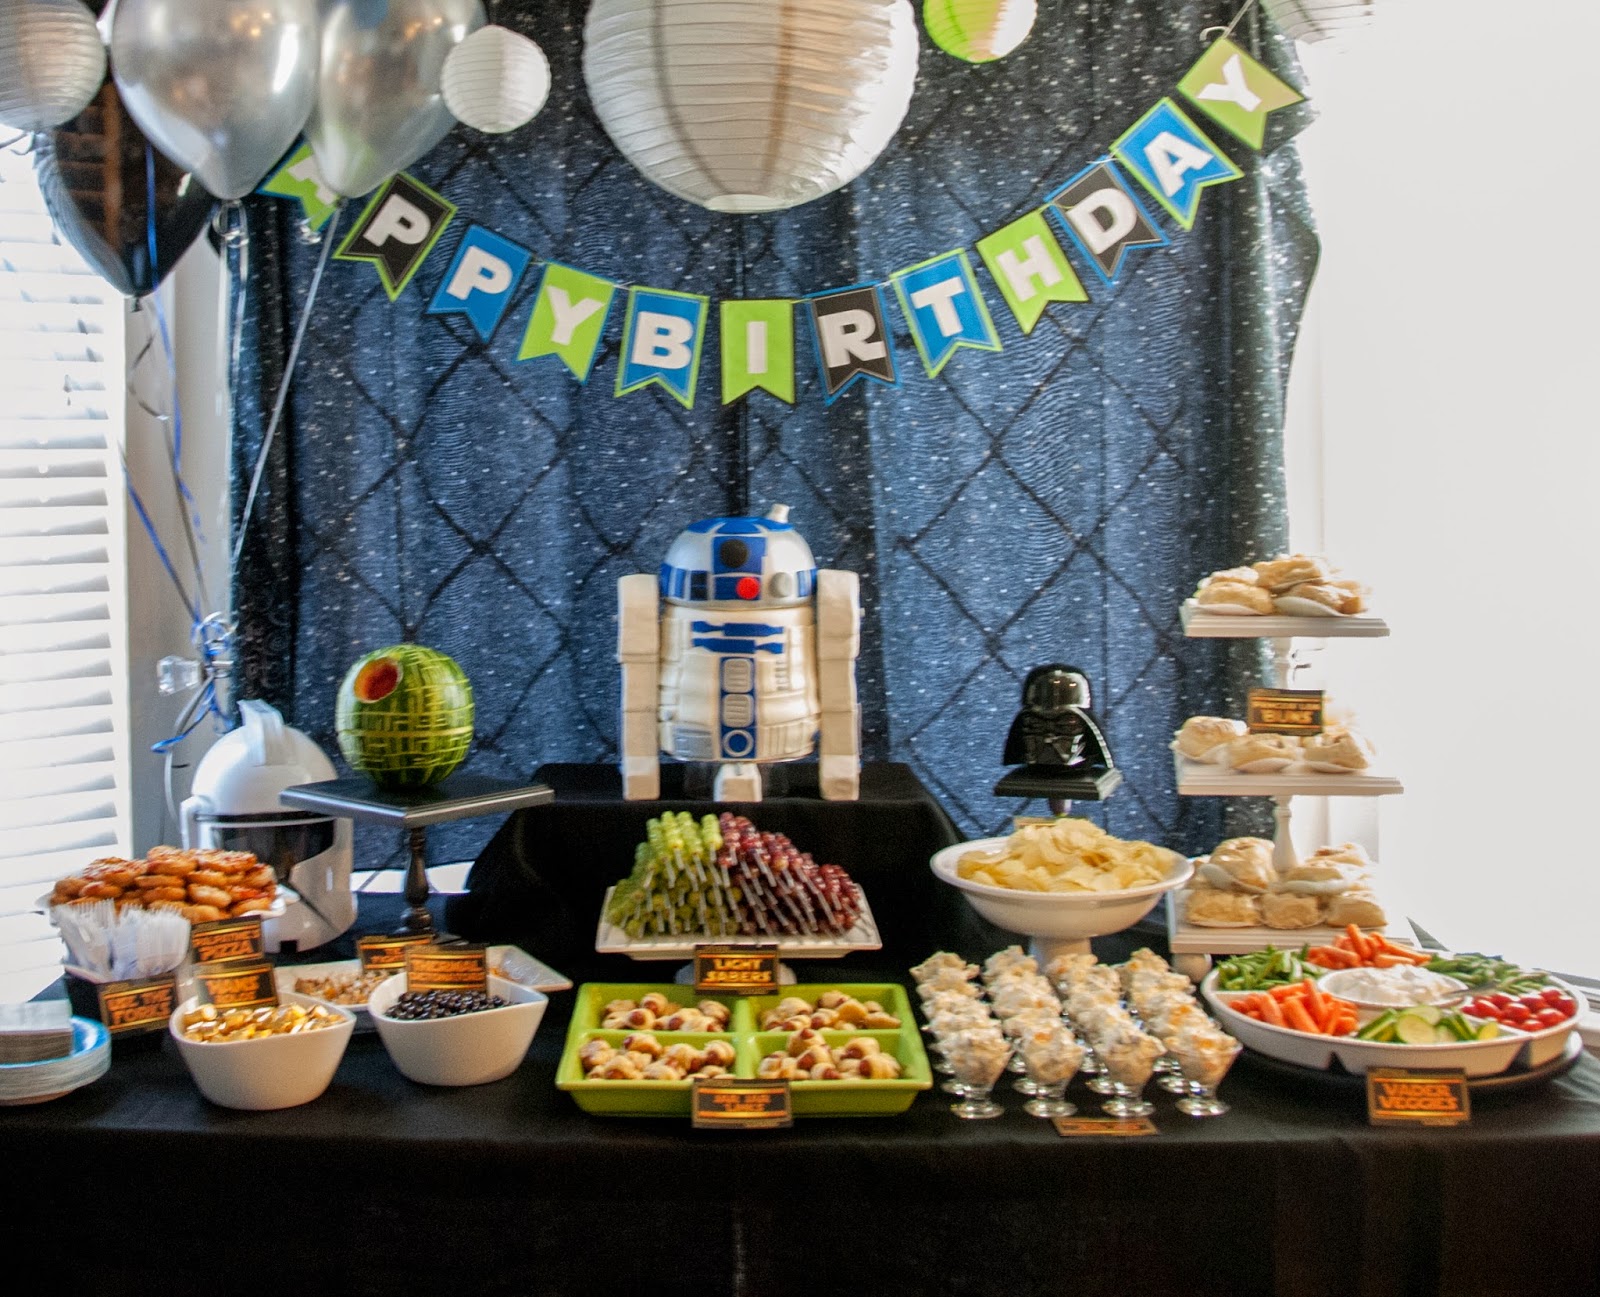 Author Robin King Blog Star Wars Party  with R2D2 Cake